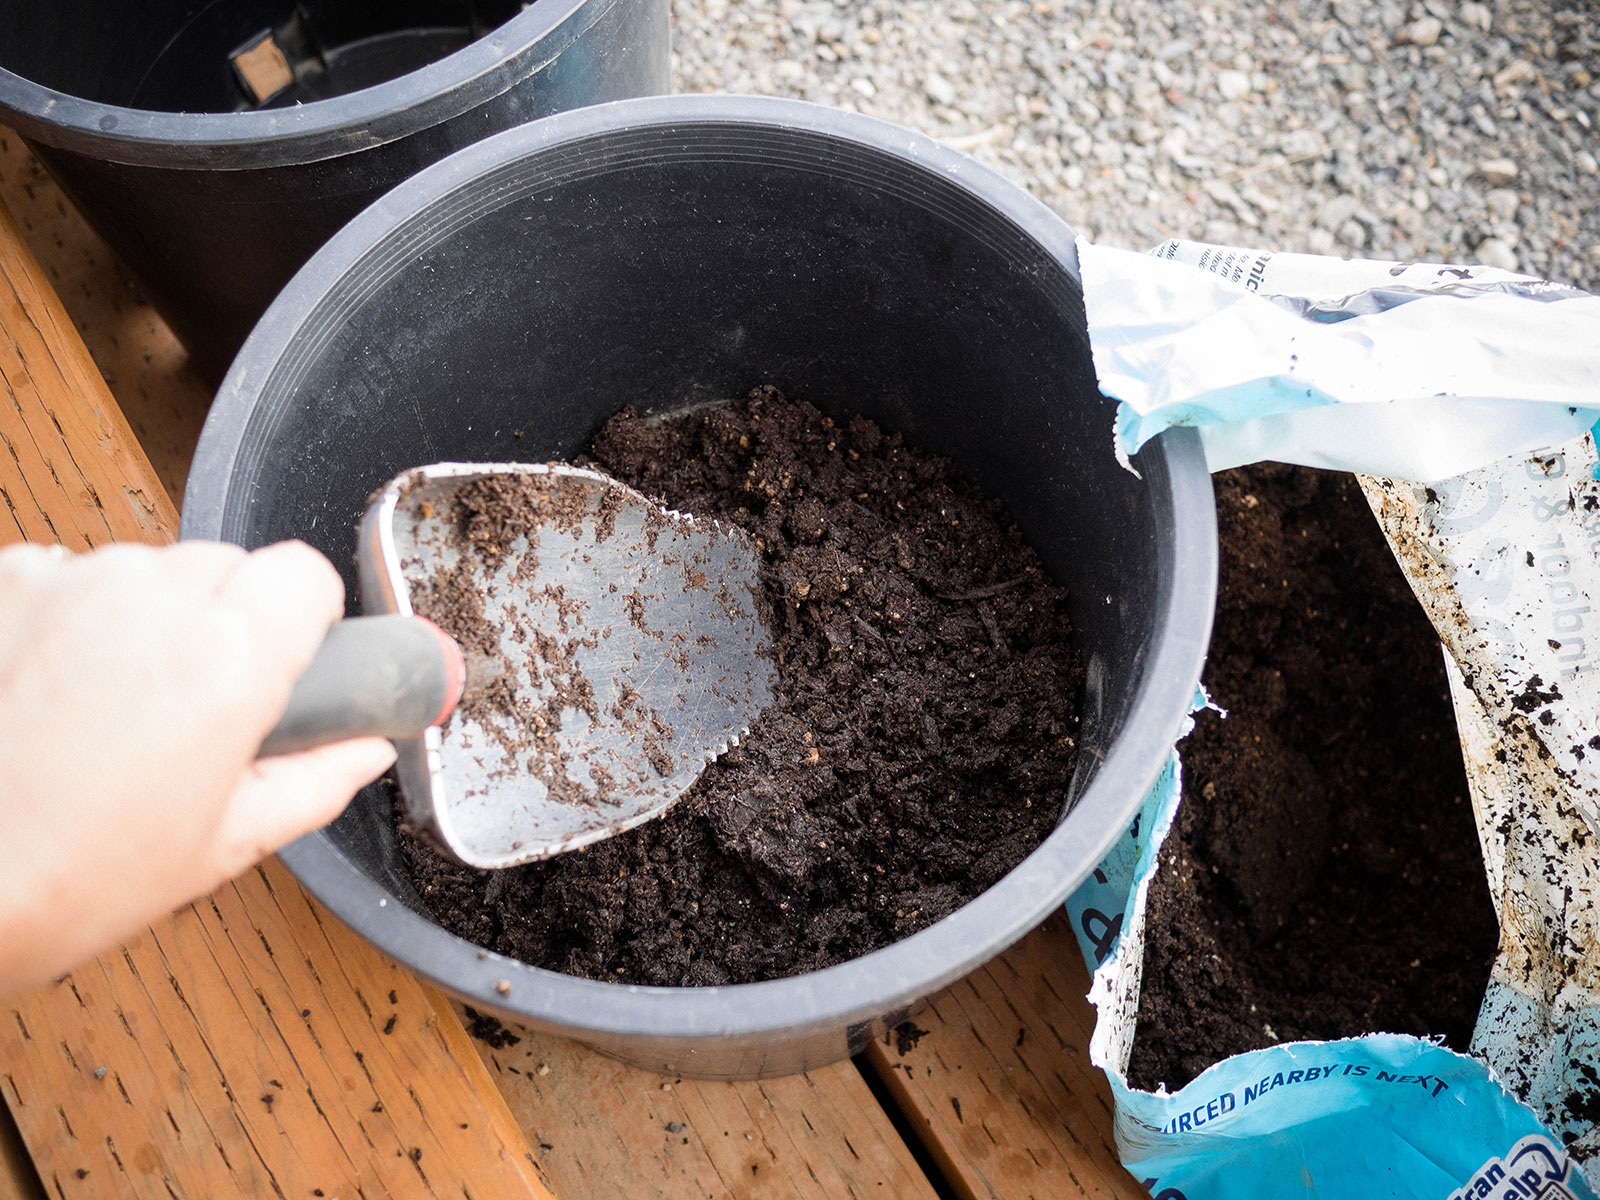 Hand holding a trowel and filling a large black plastic nursery pot with potting soil